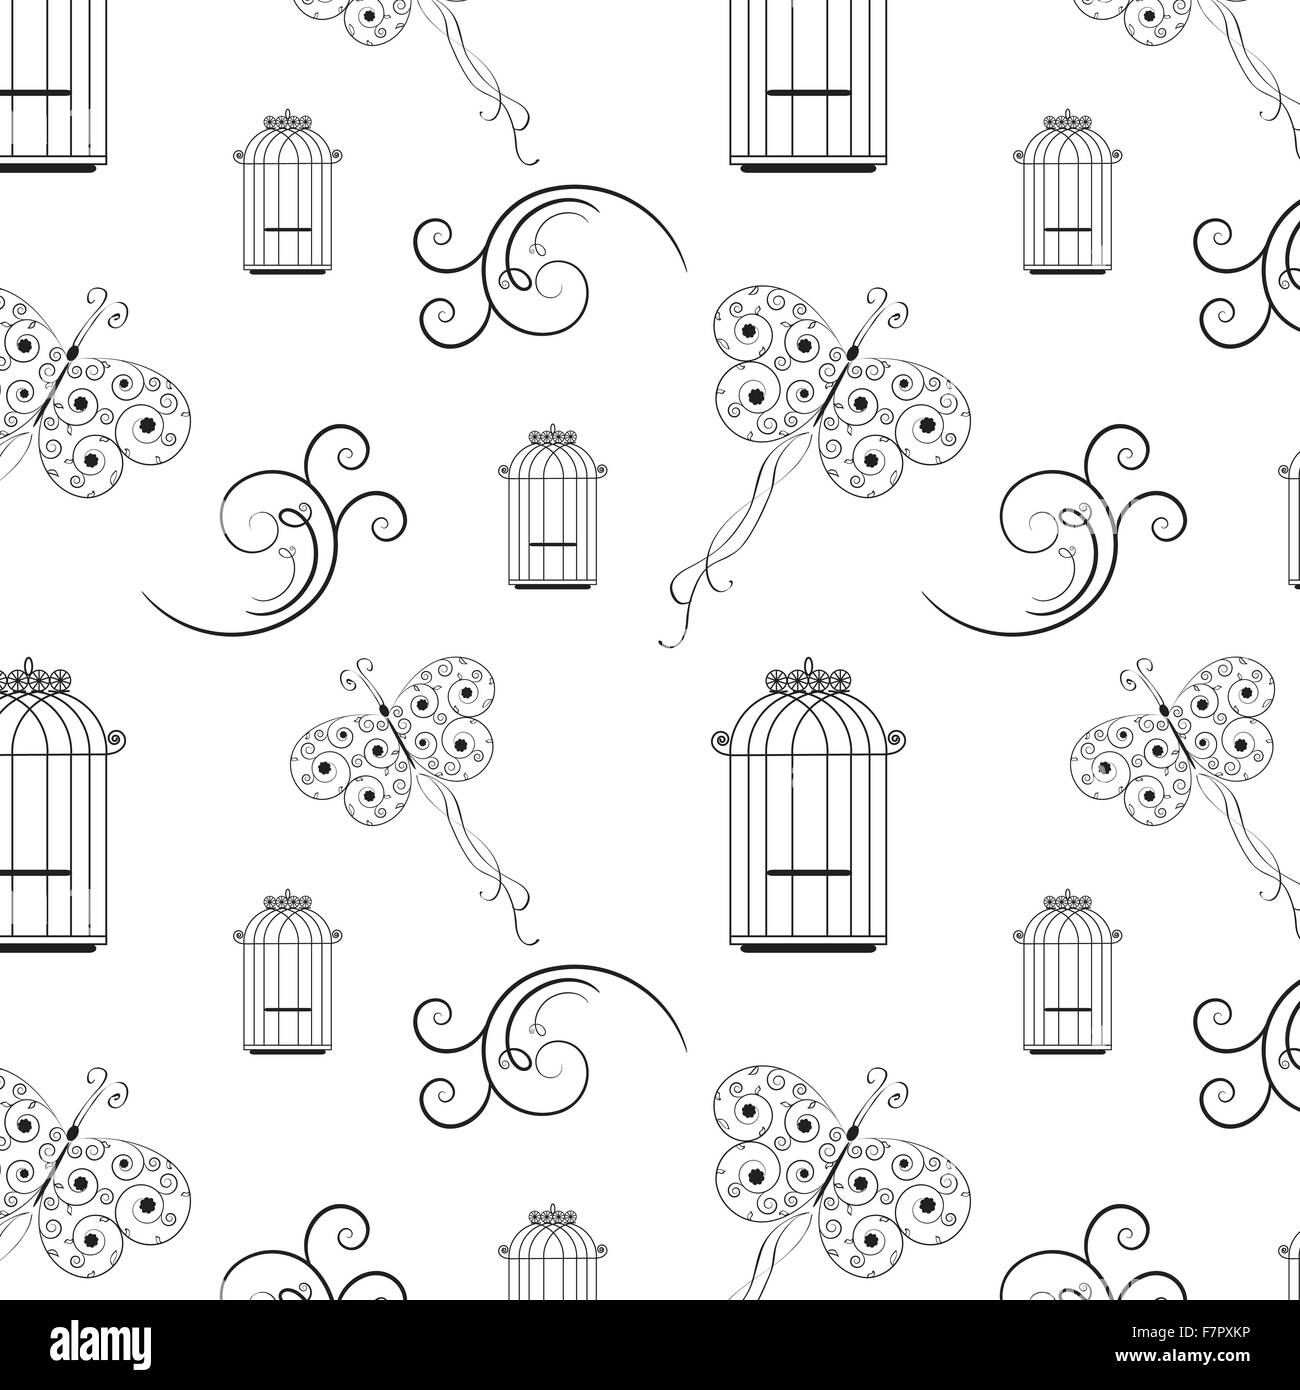 Seamless black and white pattern from tree branches, butterflies and bird cages Stock Vector